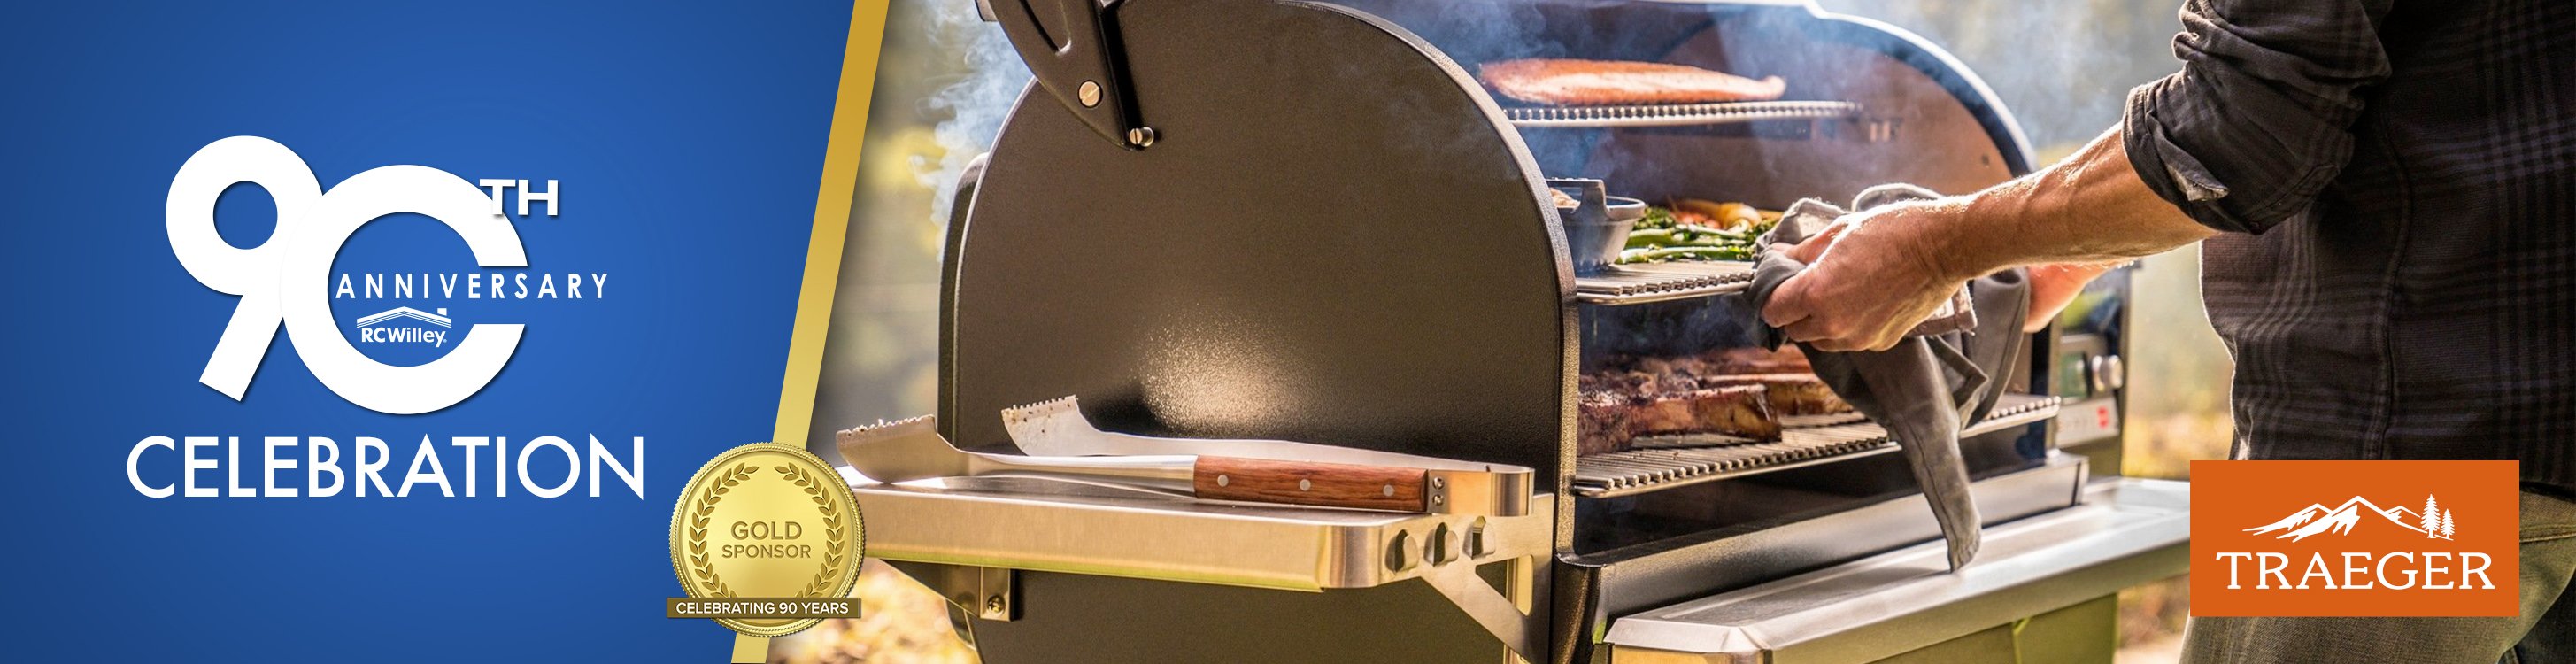 RC Willey's 90th Anniversary Sponsor Traeger